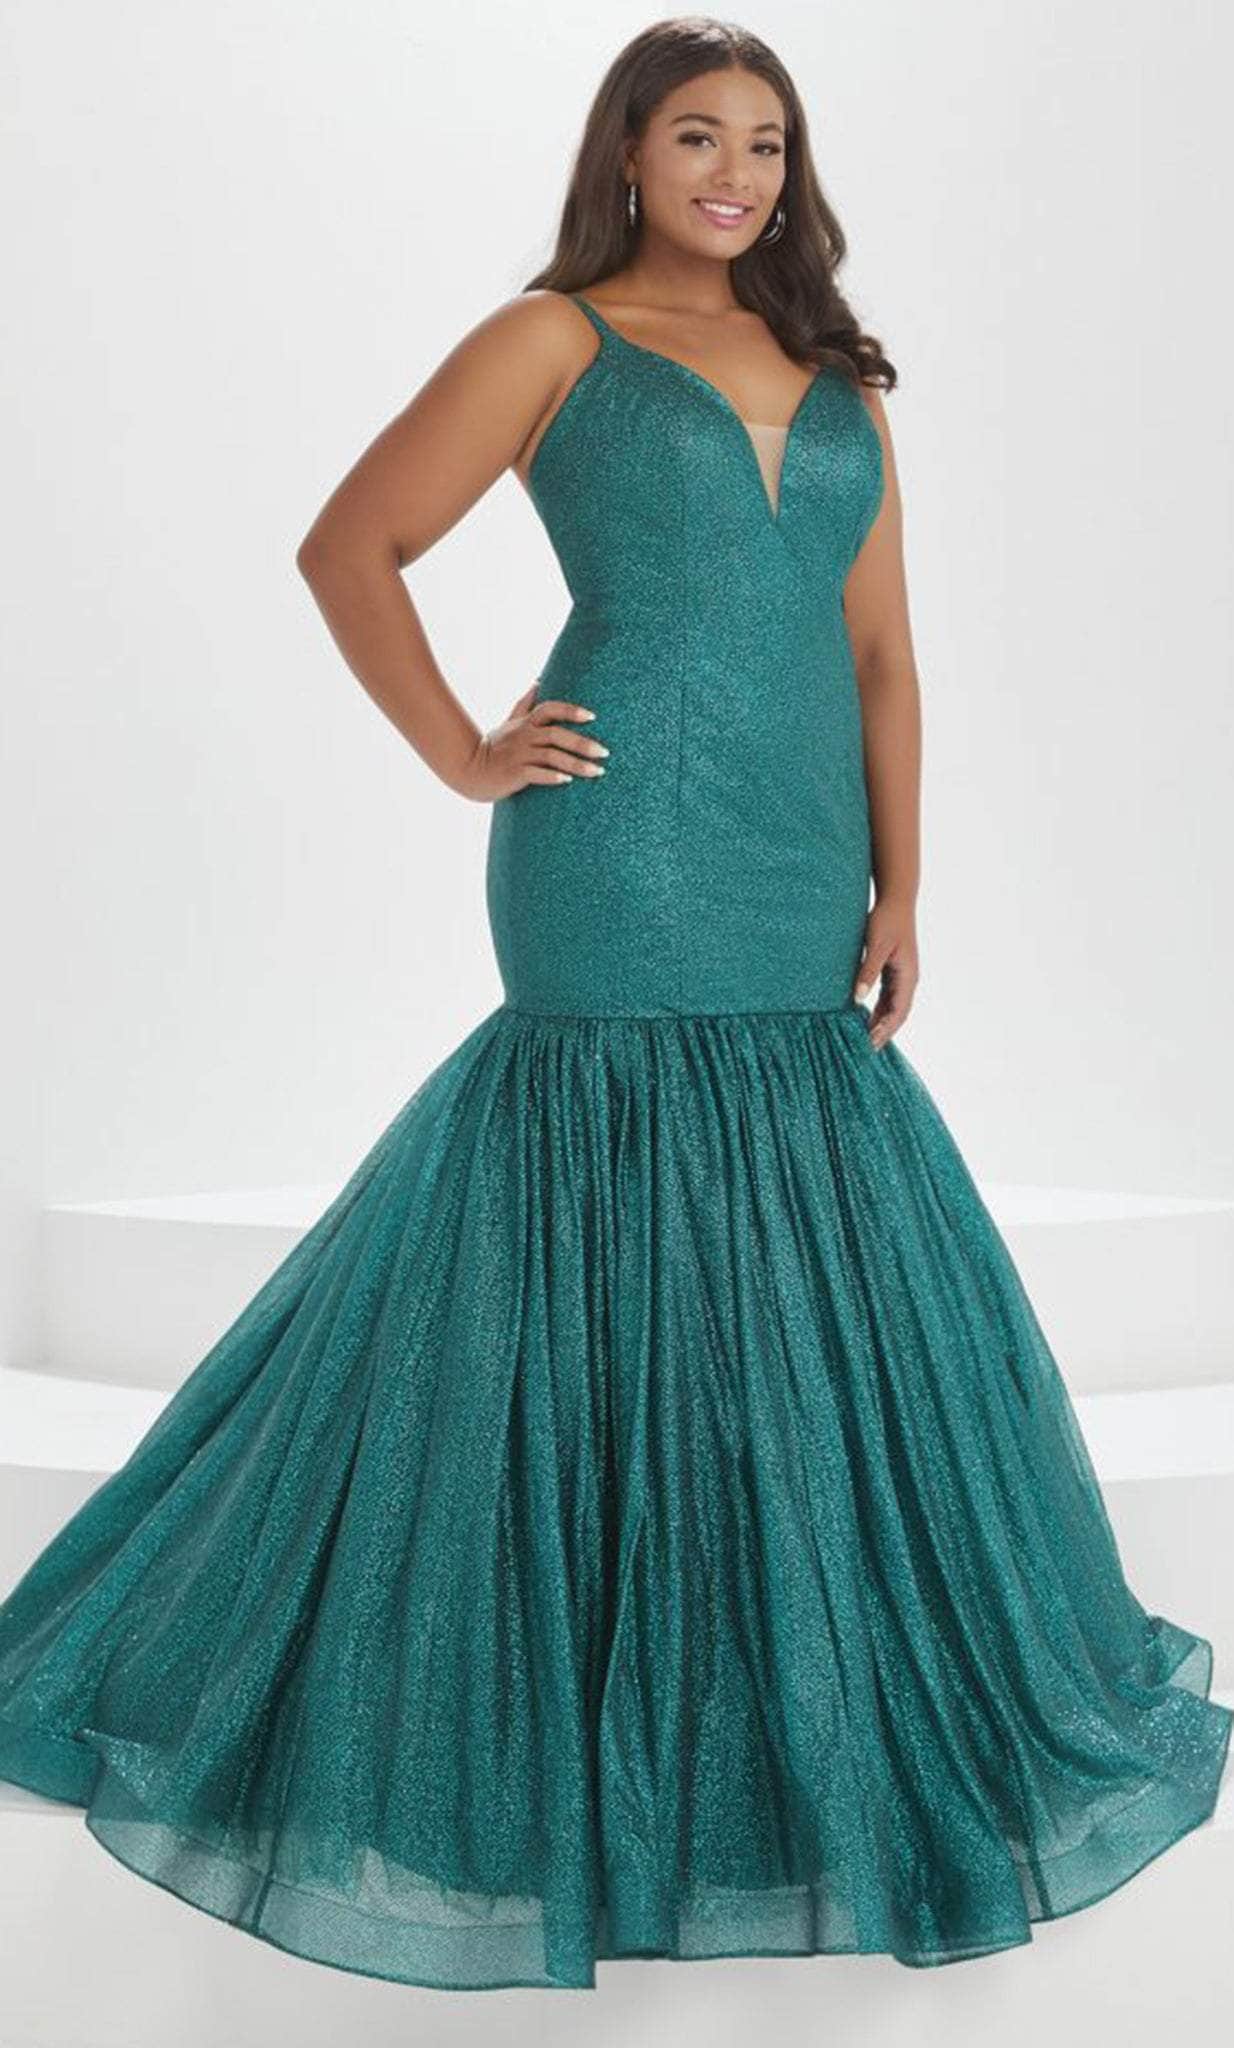 Image of Tiffany Designs by Christina Wu 16047 - Glittered Mermaid Evening Gown